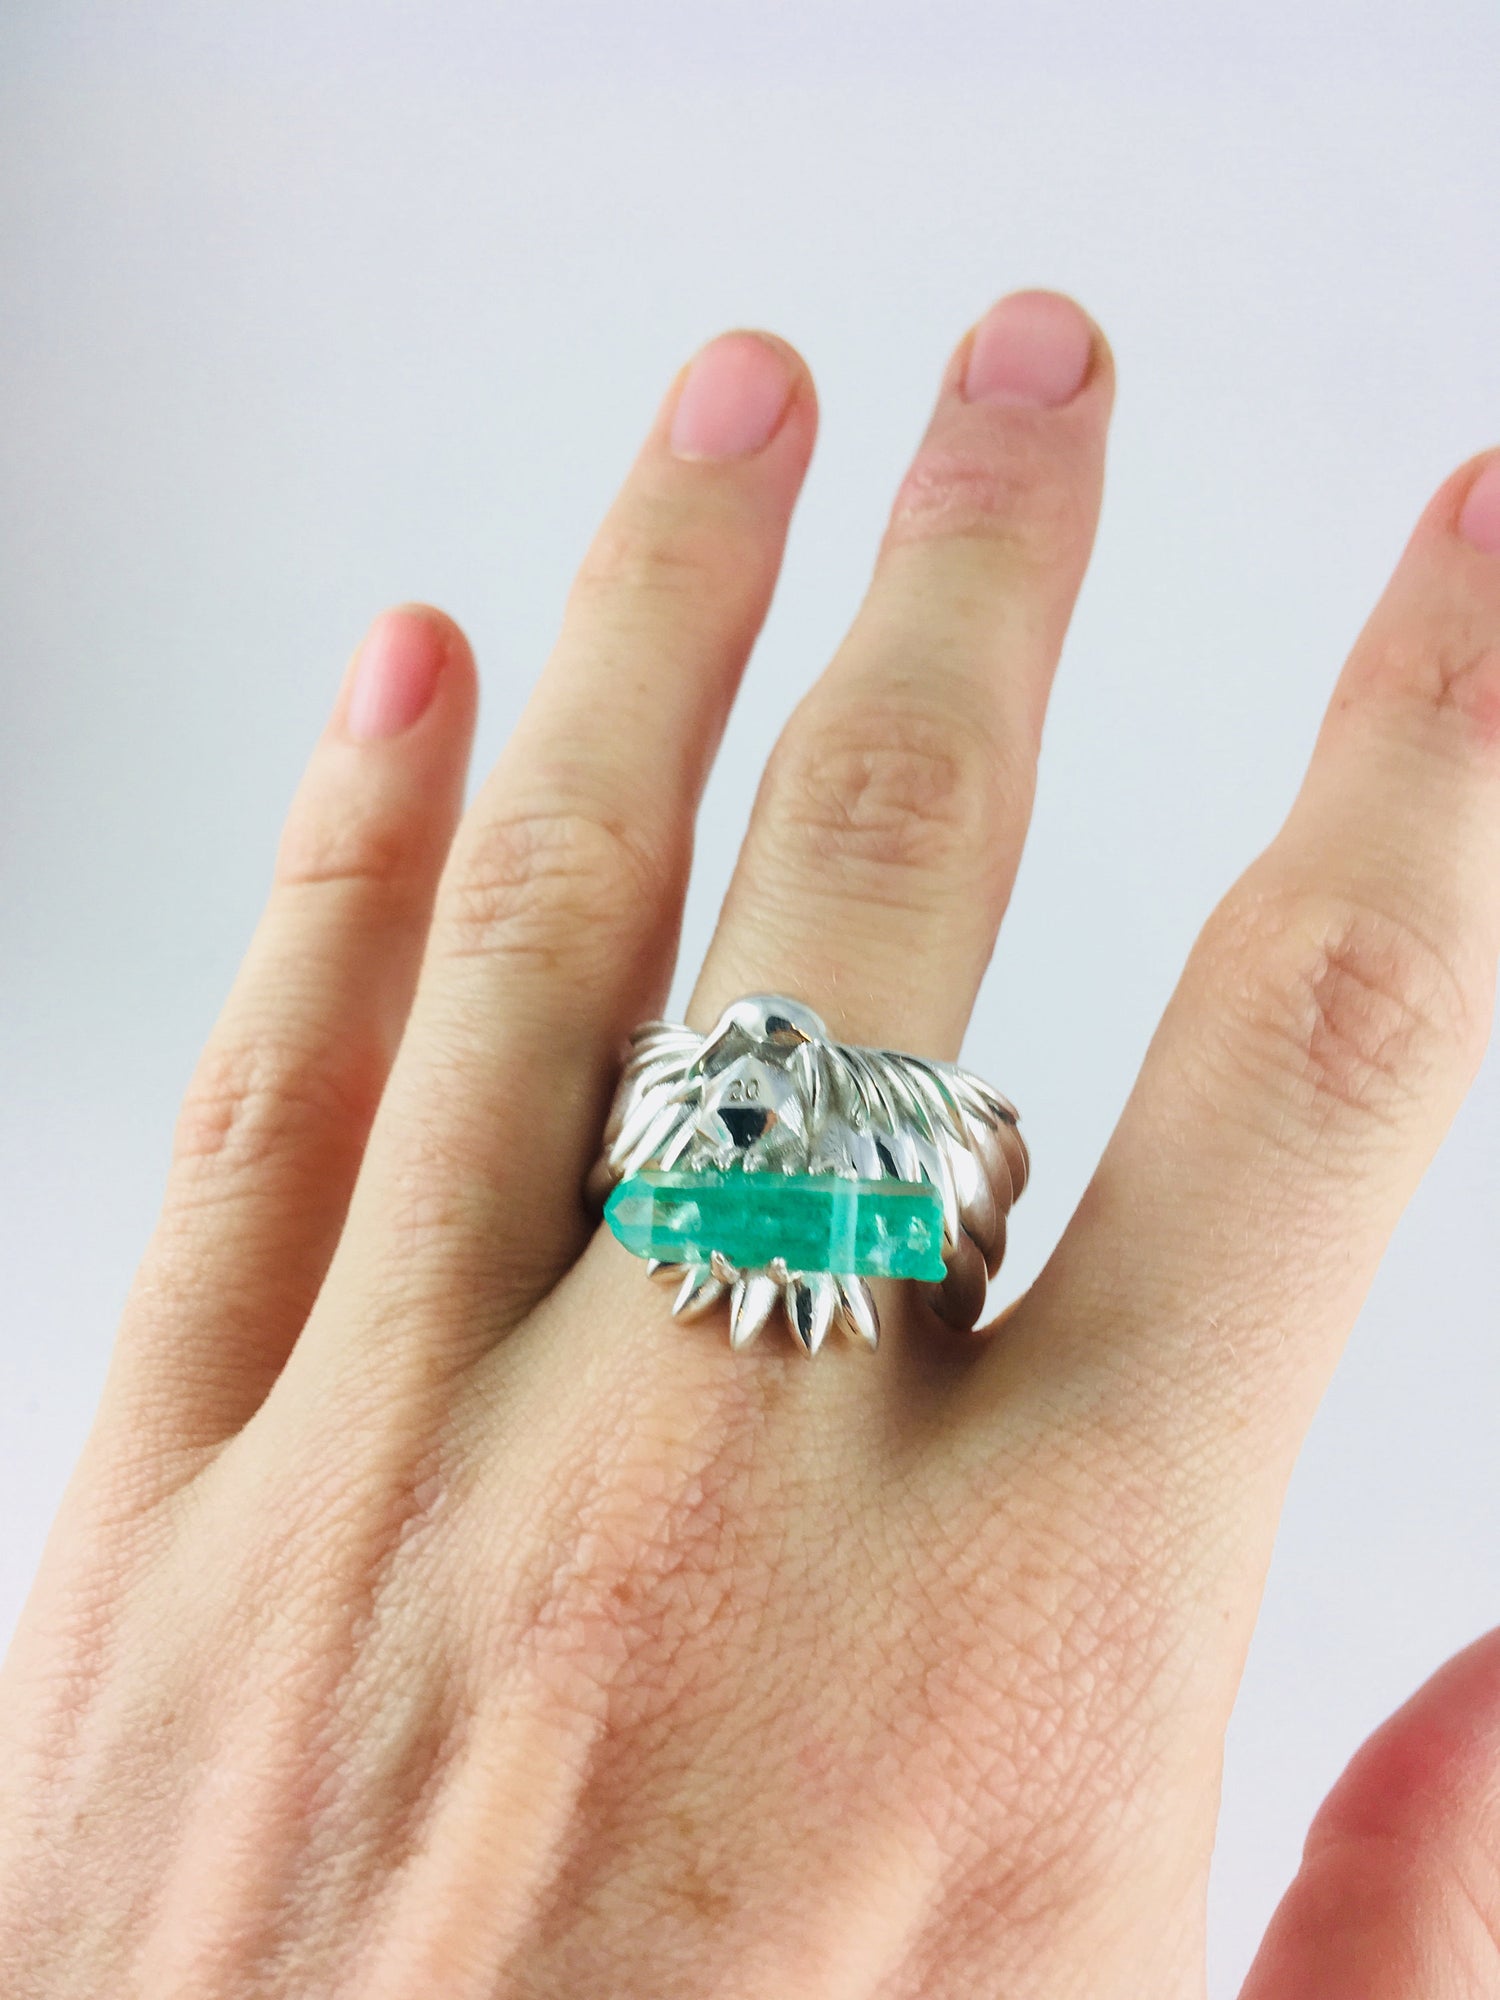 D&D Dungeons and Dragons Raven Ring with a Green Quartz Crystal in the Talons and D20 in the beak Video Game Nerd Engagement Wedding Men DnD